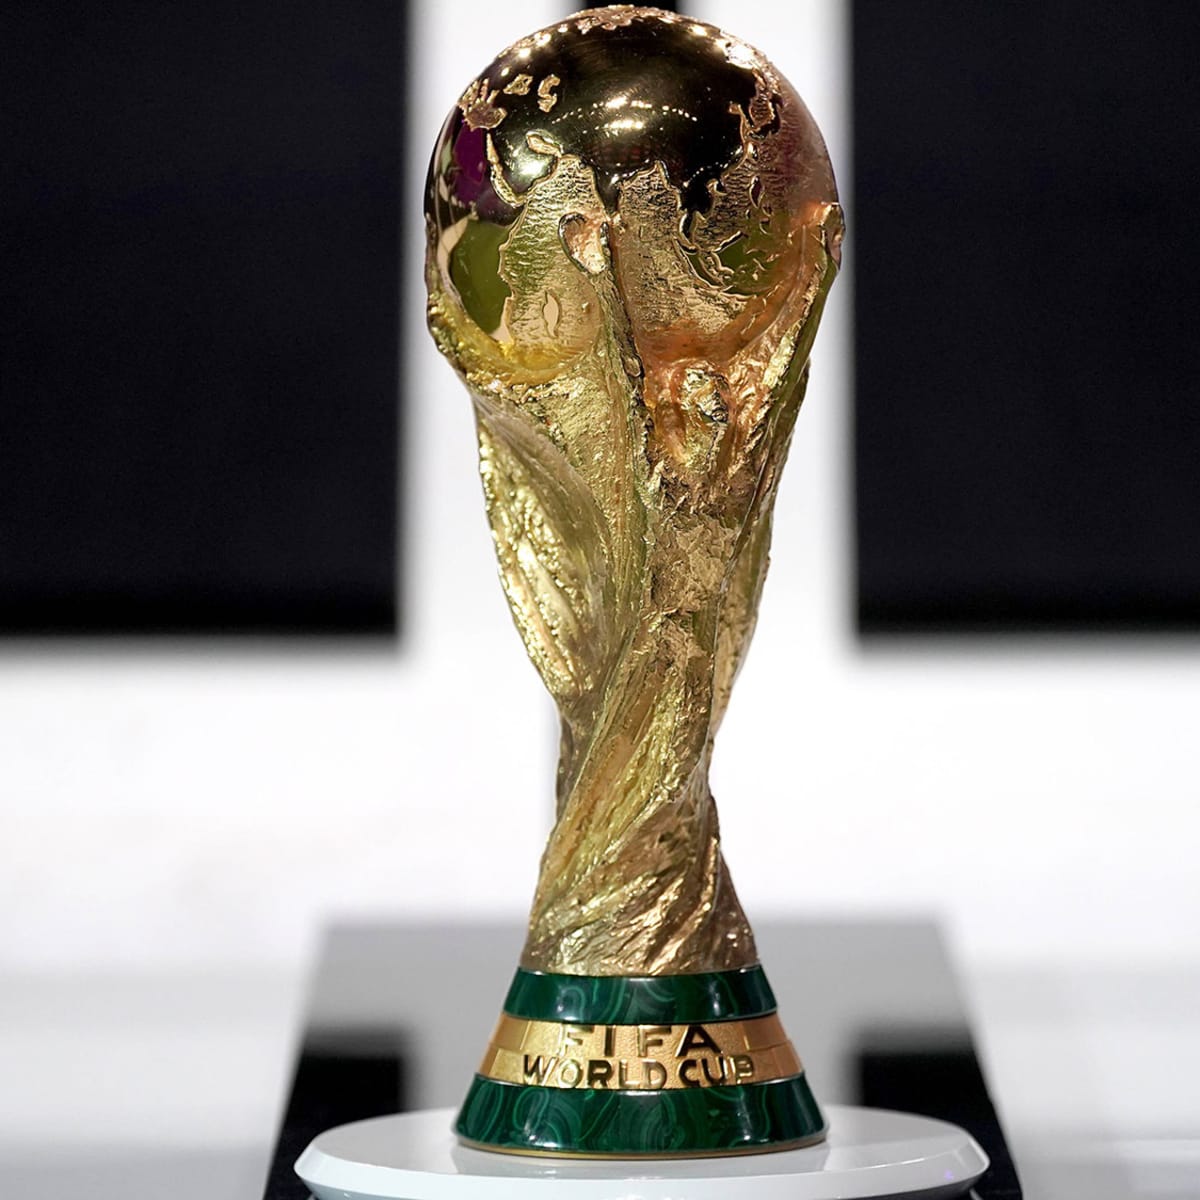 Where is Fifa World Cup 2026? Host country for next tournament explained